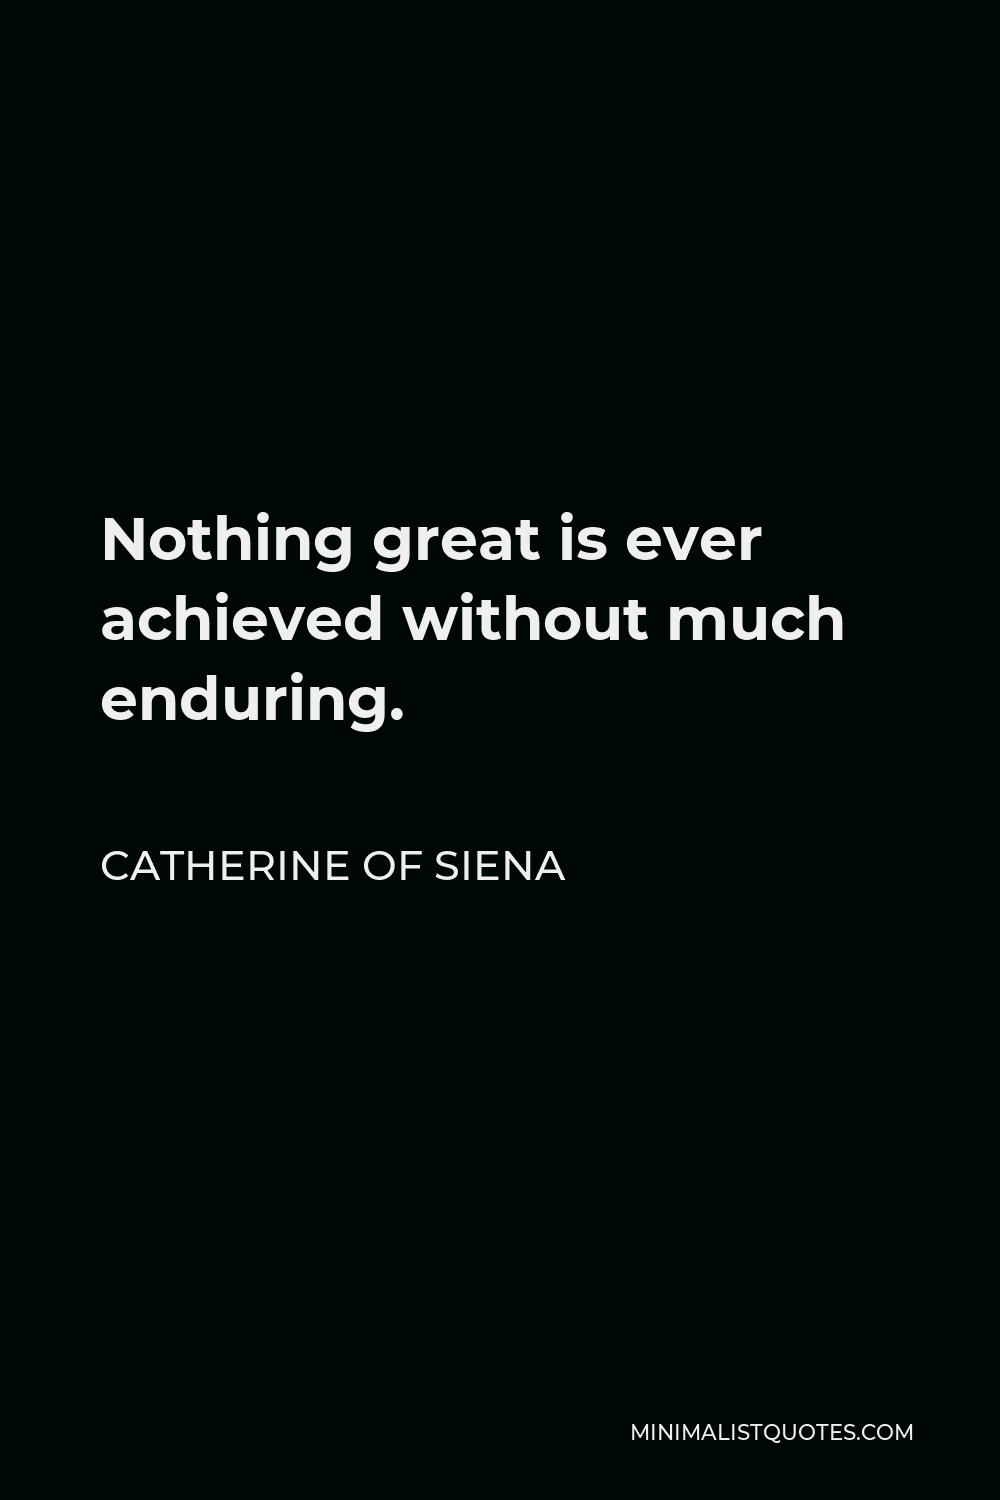 Catherine of Siena Quote - Nothing great is ever achieved without much enduring.